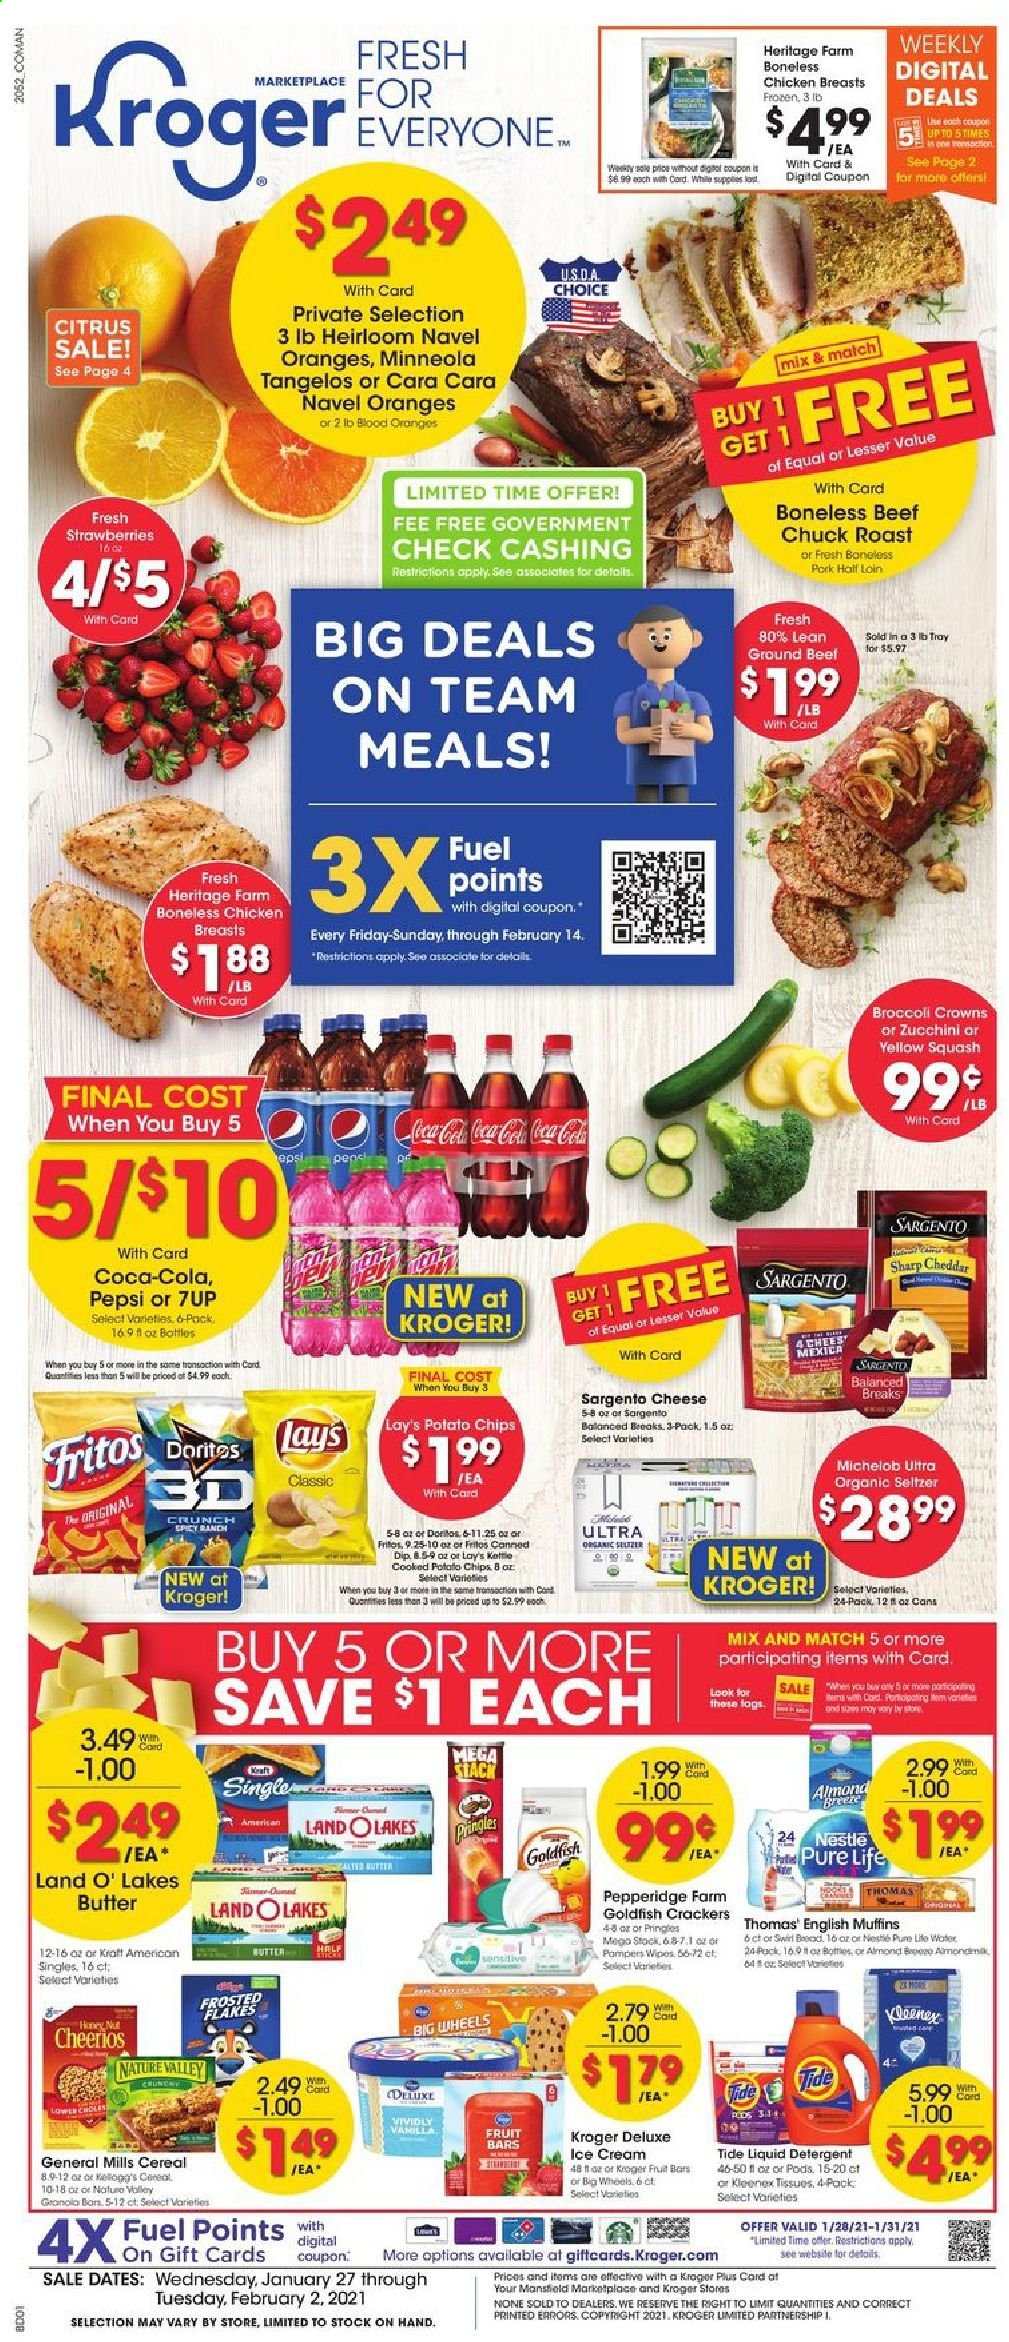 thumbnail - Kroger Flyer - 01/27/2021 - 02/02/2021 - Sales products - tangelos, muffin, oranges, english muffins, Kraft®, cheddar, cheese, Sargento, butter, dip, ice cream, strawberries, zucchini, Nestlé, crackers, Kellogg's, Doritos, potato chips, Pringles, Lay’s, Goldfish, cereals, Fritos, granola, Cheerios, Frosted Flakes, Nature Valley, honey, almonds, Coca-Cola, Pepsi, 7UP, seltzer water, beer, Michelob, chicken breasts, beef meat, ground beef, chuck roast, Kleenex, tissues, detergent, wipes, Tide, liquid detergent, tray, Sharp. Page 1.